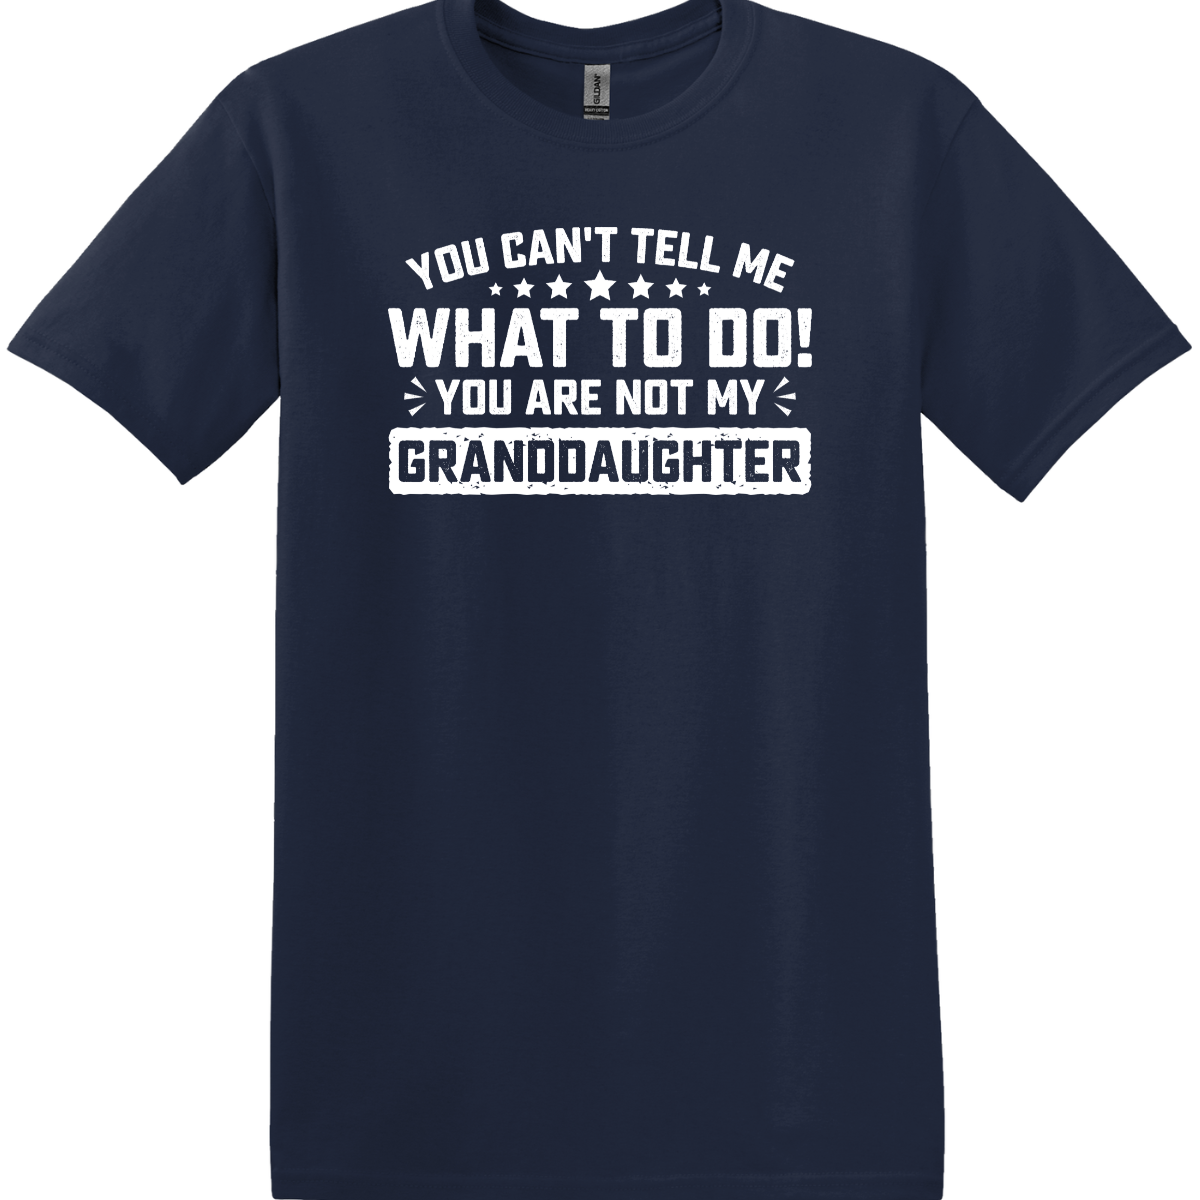 You Can't Tell Me What to Do - Granddaughter Tee